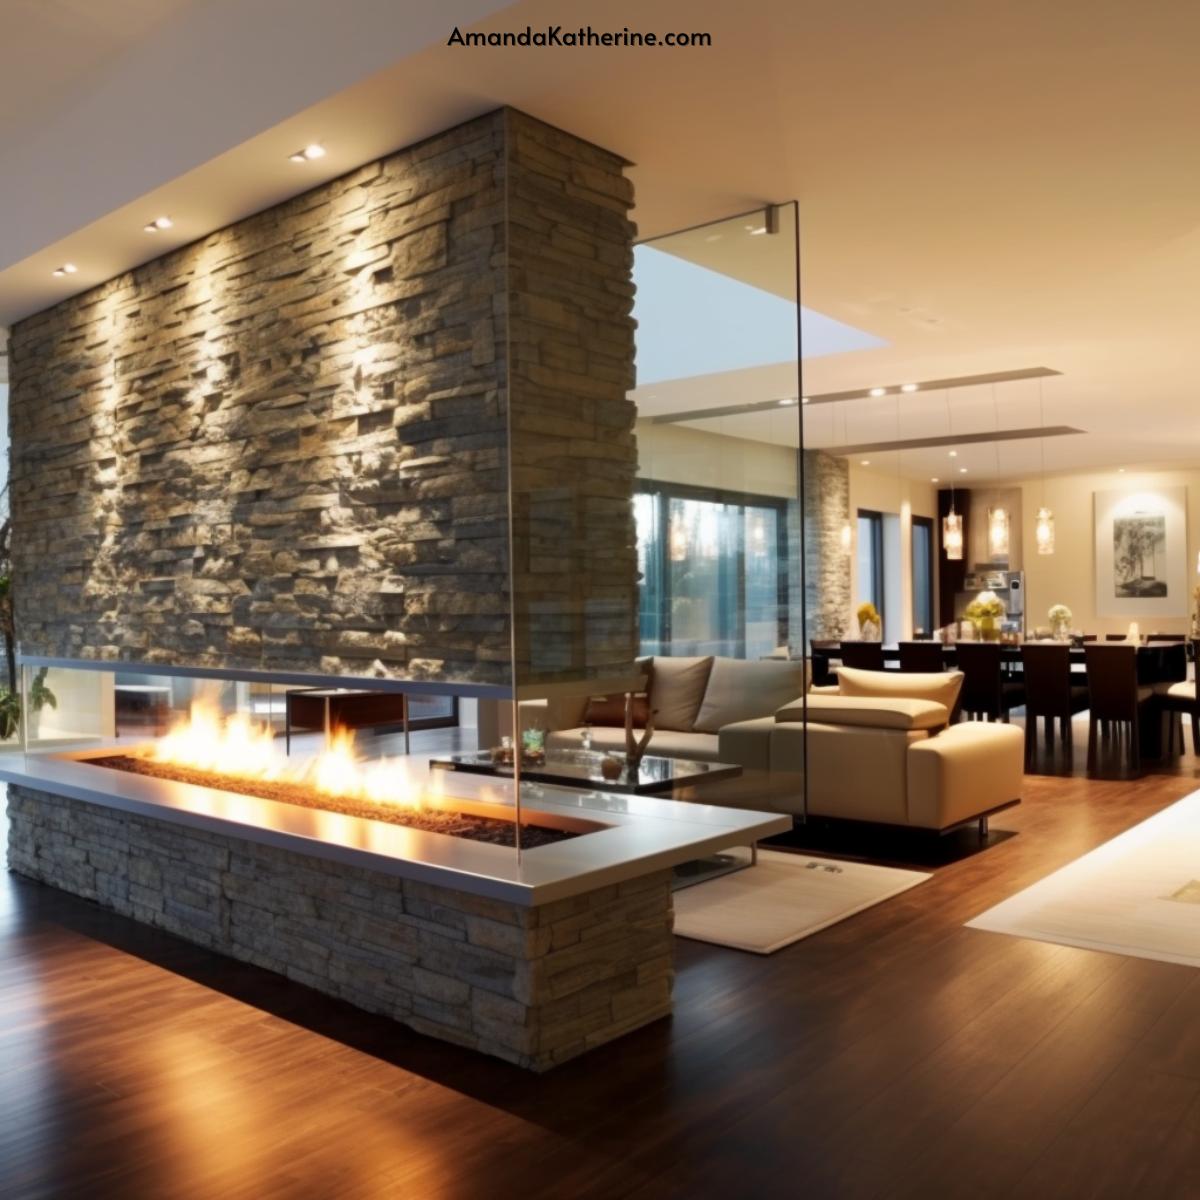 31 Stunning Fireplace Wall Ideas with a TV for Your Living Room | transparent fireplace